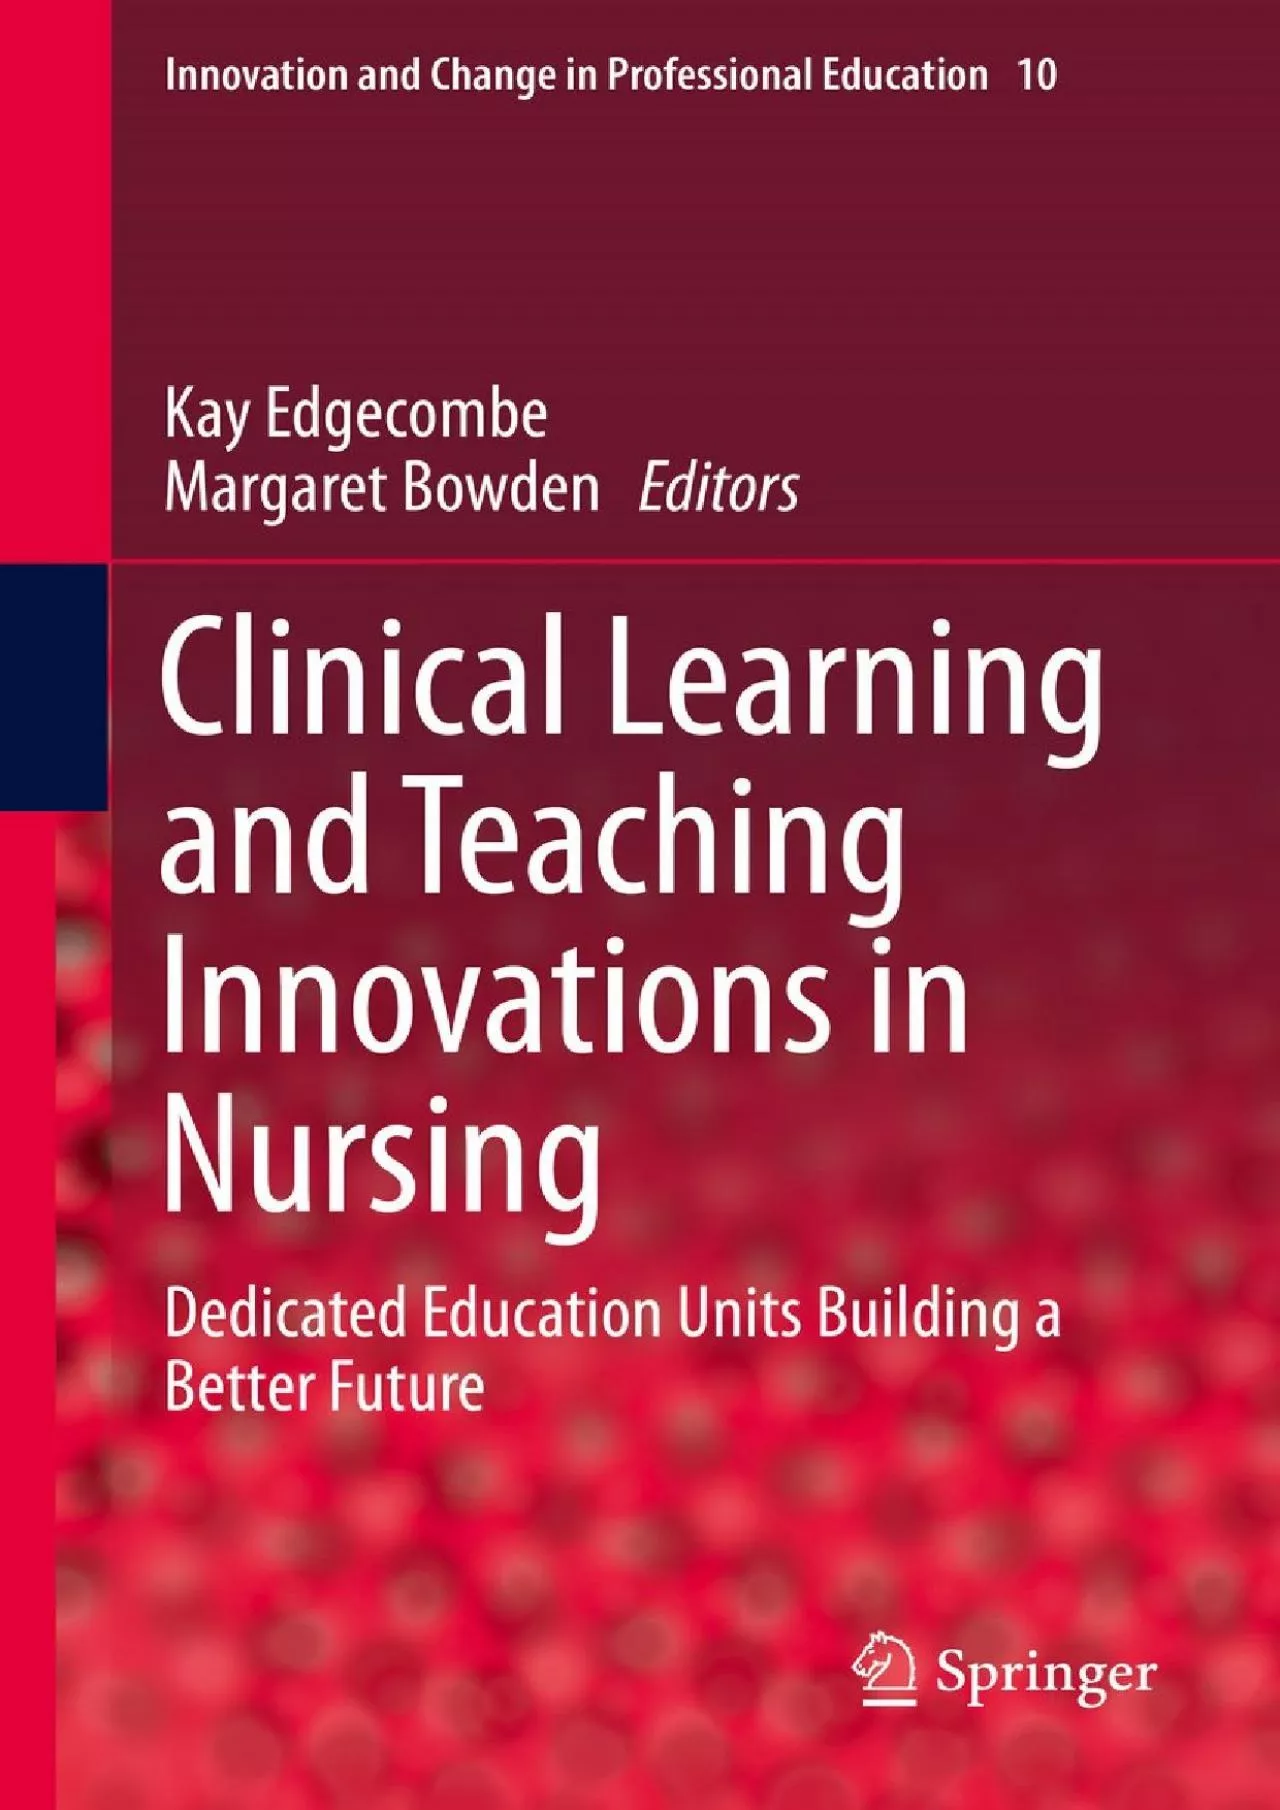 [READ] Clinical Learning and Teaching Innovations in Nursing: Dedicated Education Units